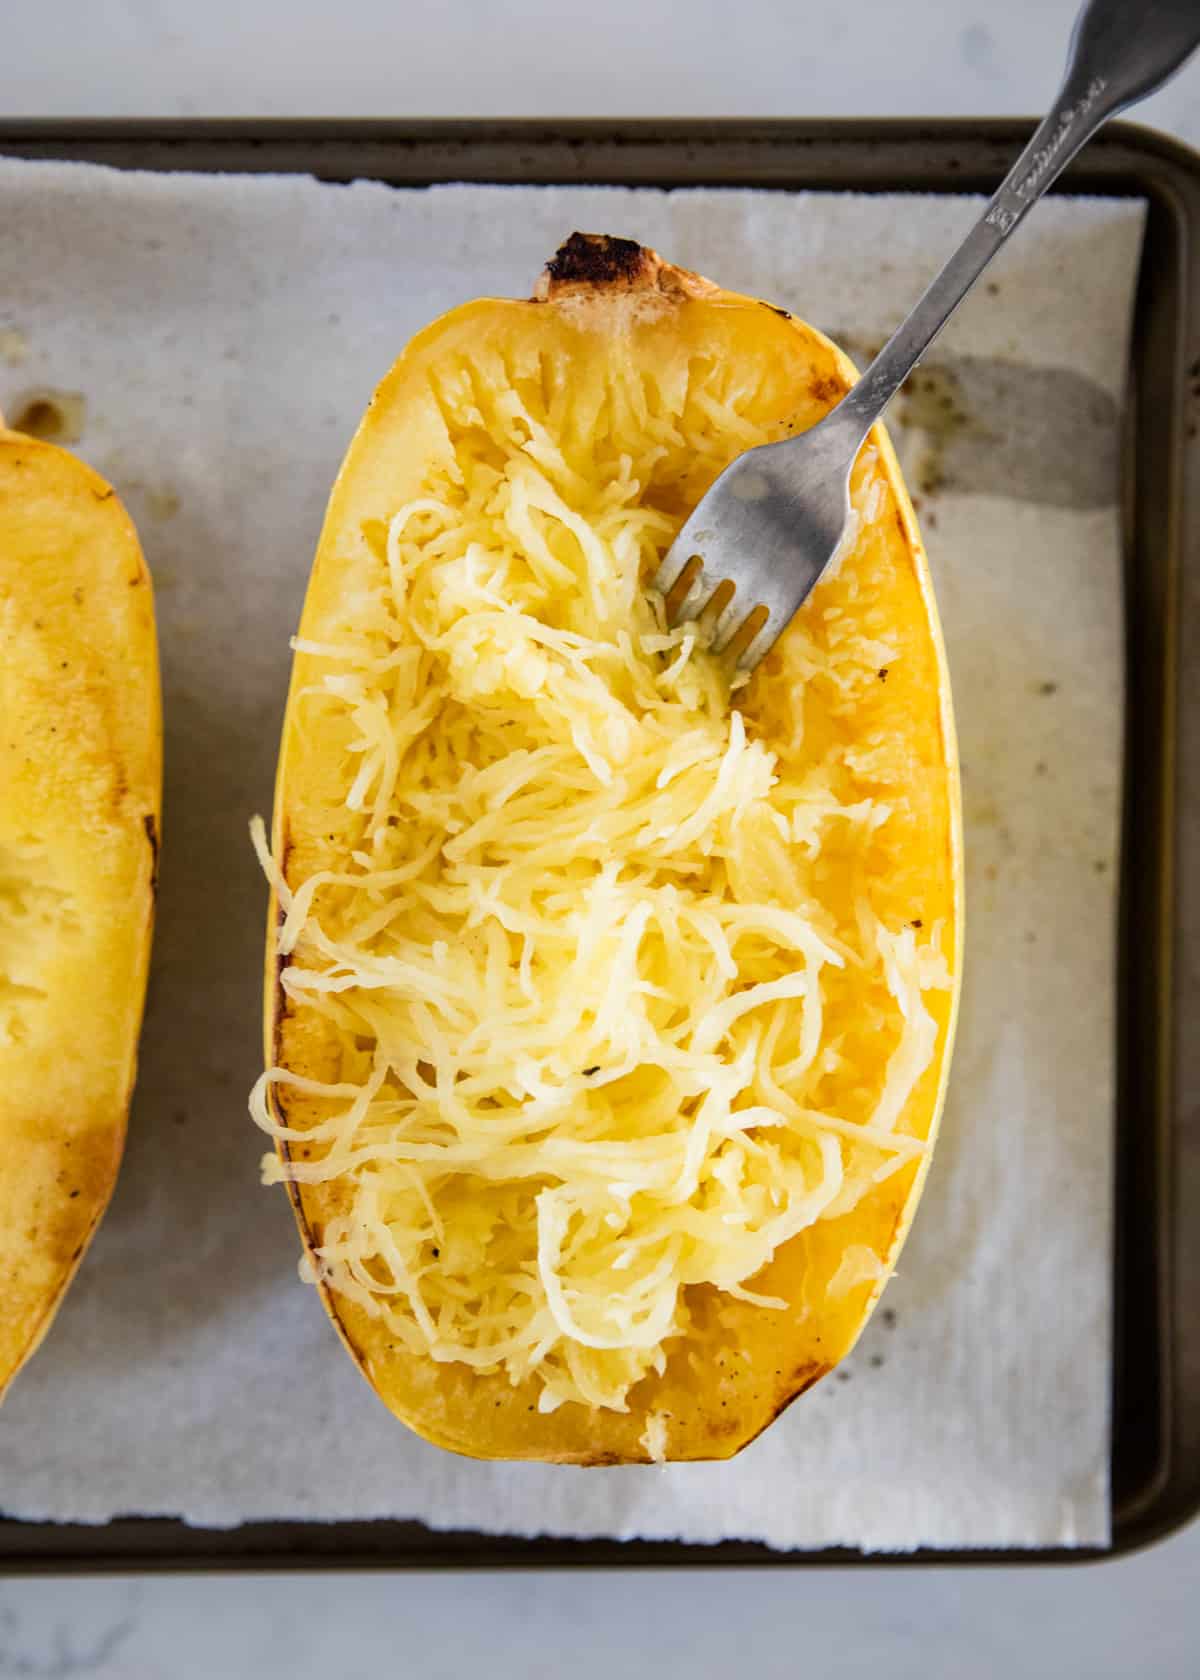 Cooked spaghetti squash on a baking sheet.